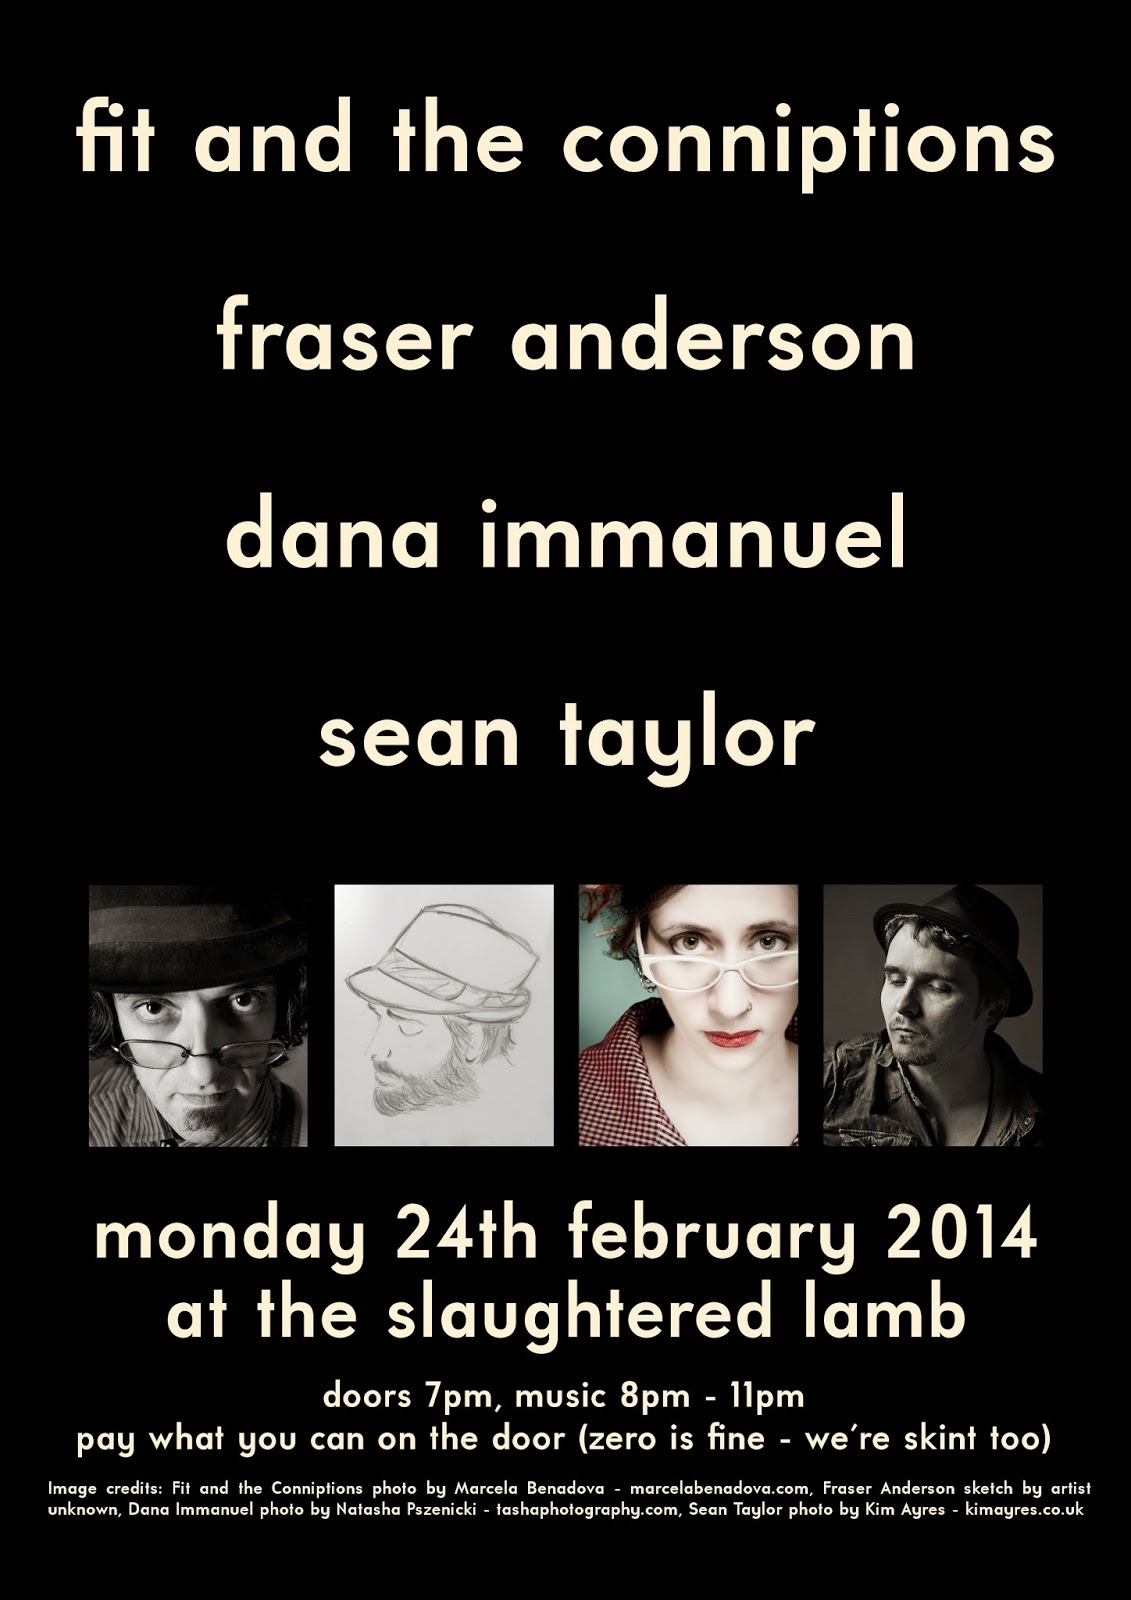 Gig poster advertising Fit and the Conniptions, Fraser Anderson, Sean Taylor and Dana Immanuel, Monday 24th February 2014 at the Slaughtered Lamb